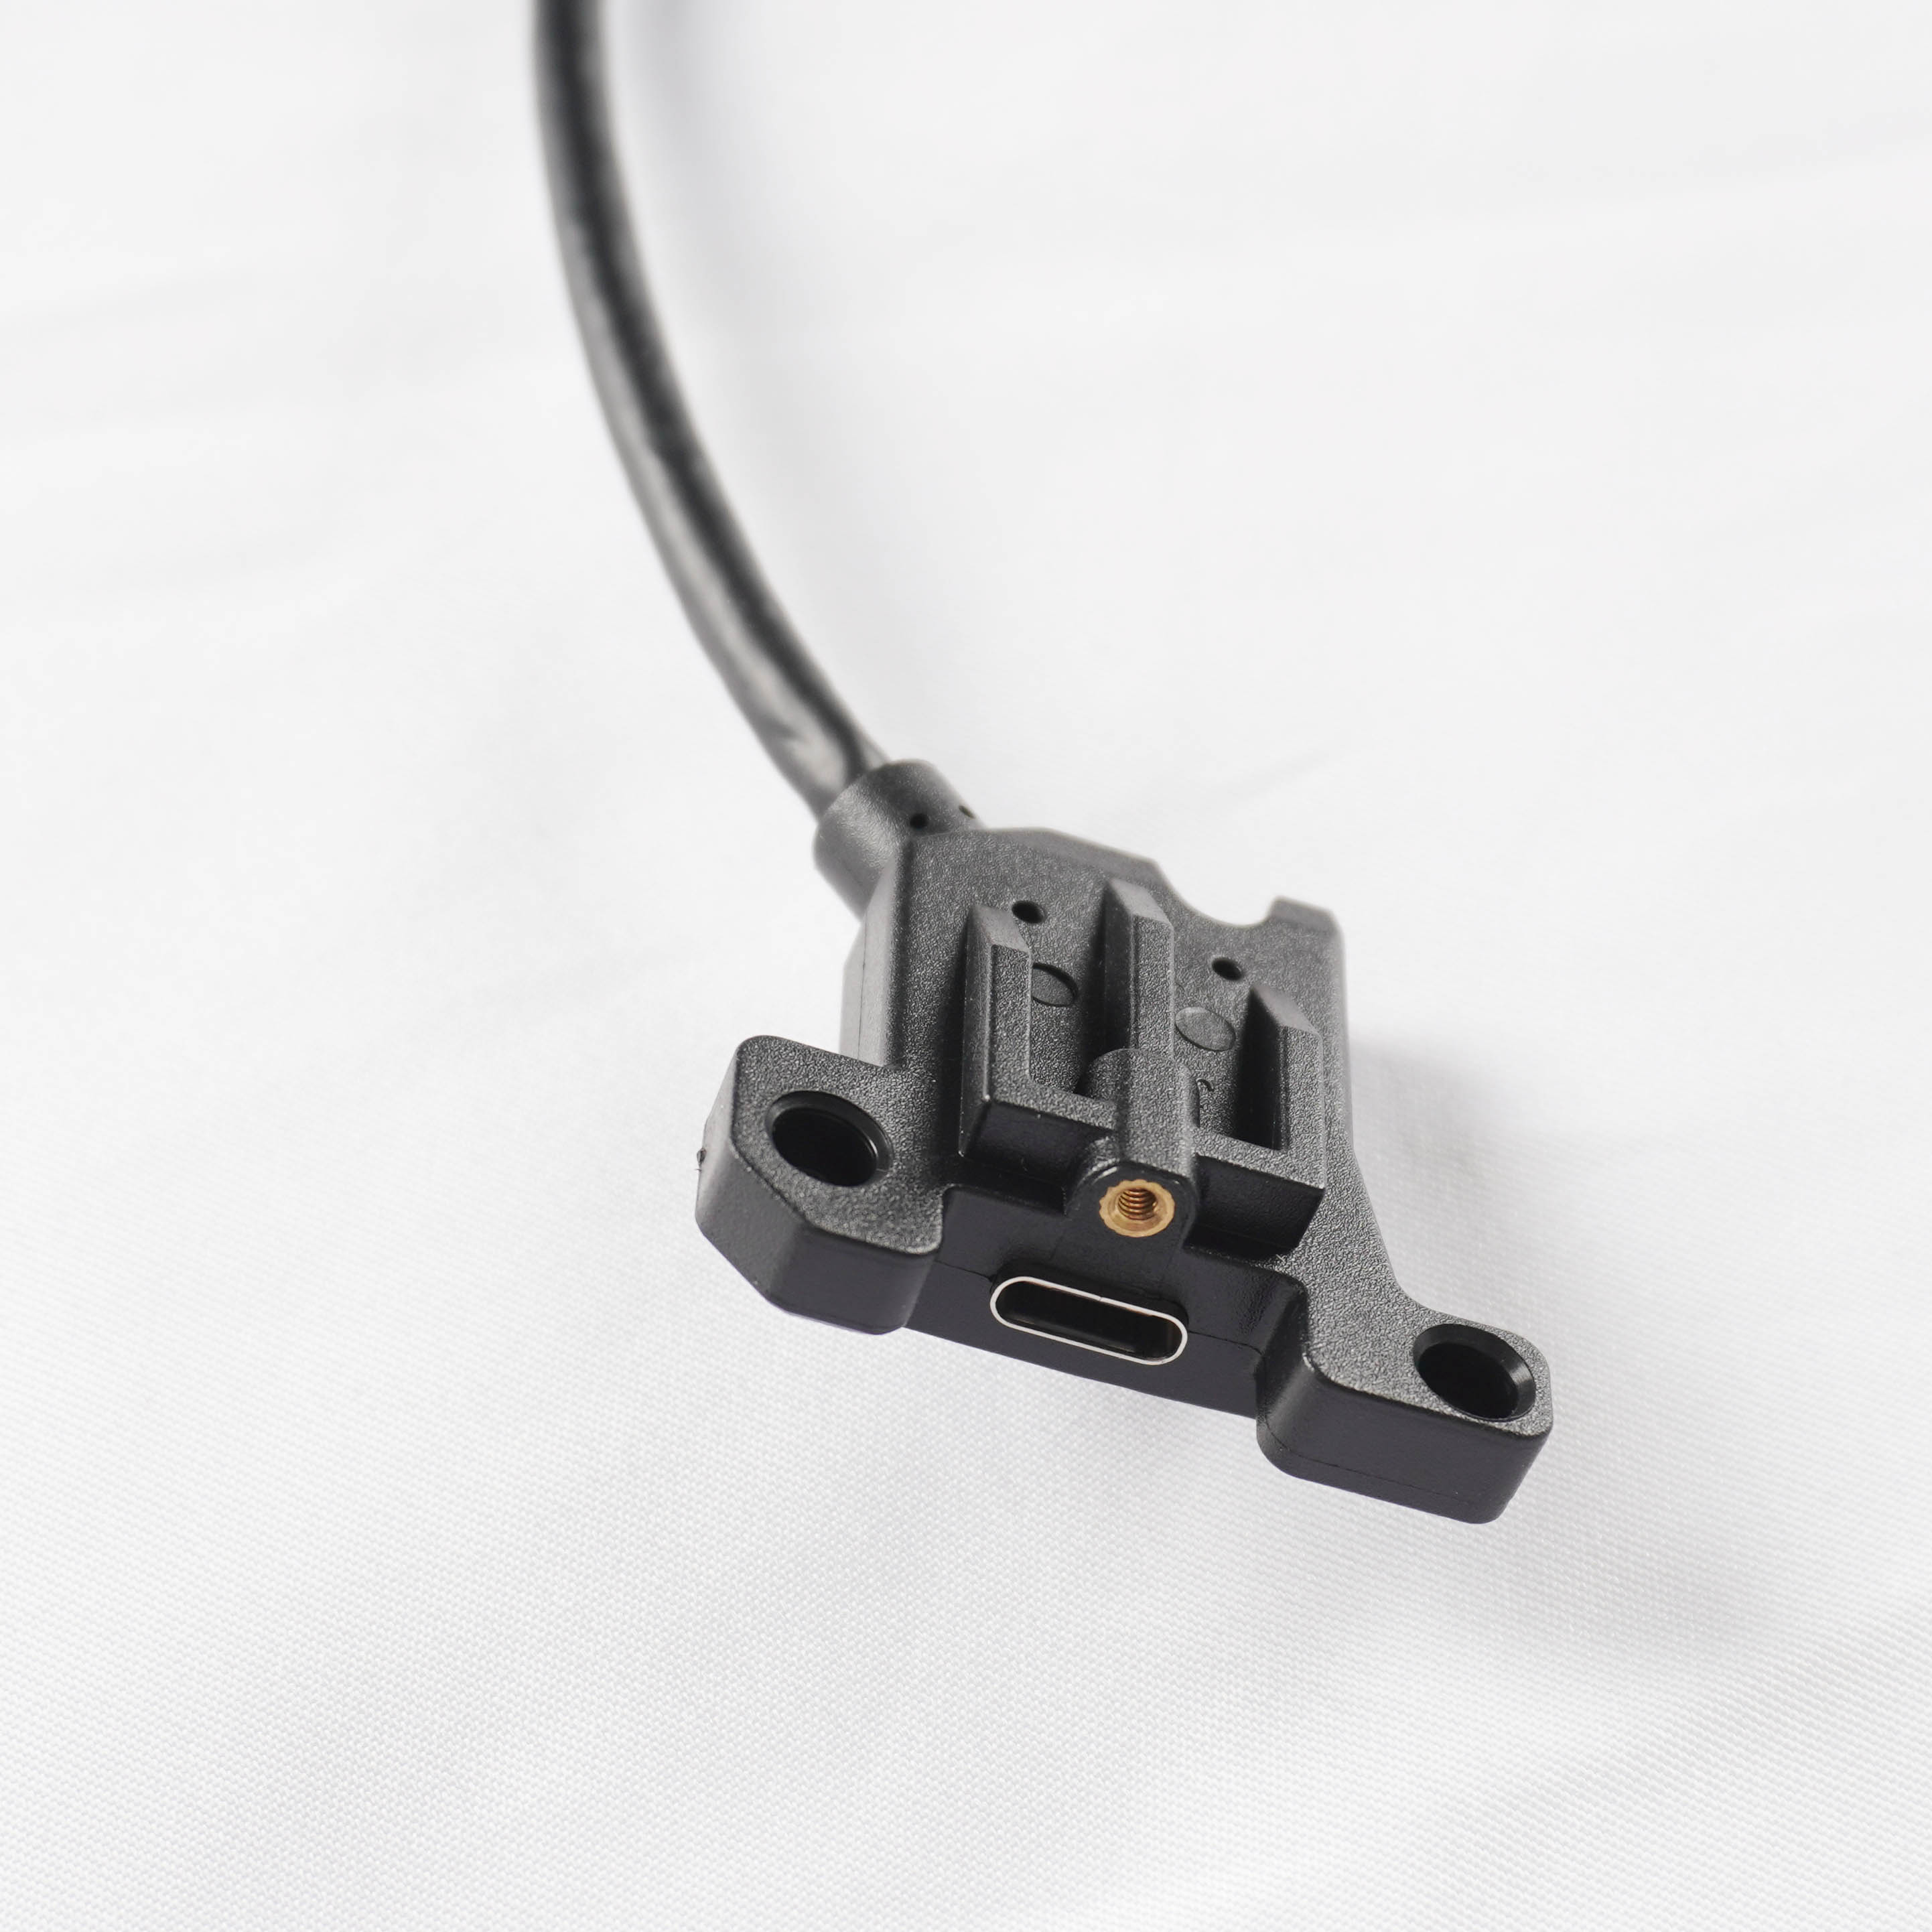 Panel Mount USB-C Female To USB-C Male Cable